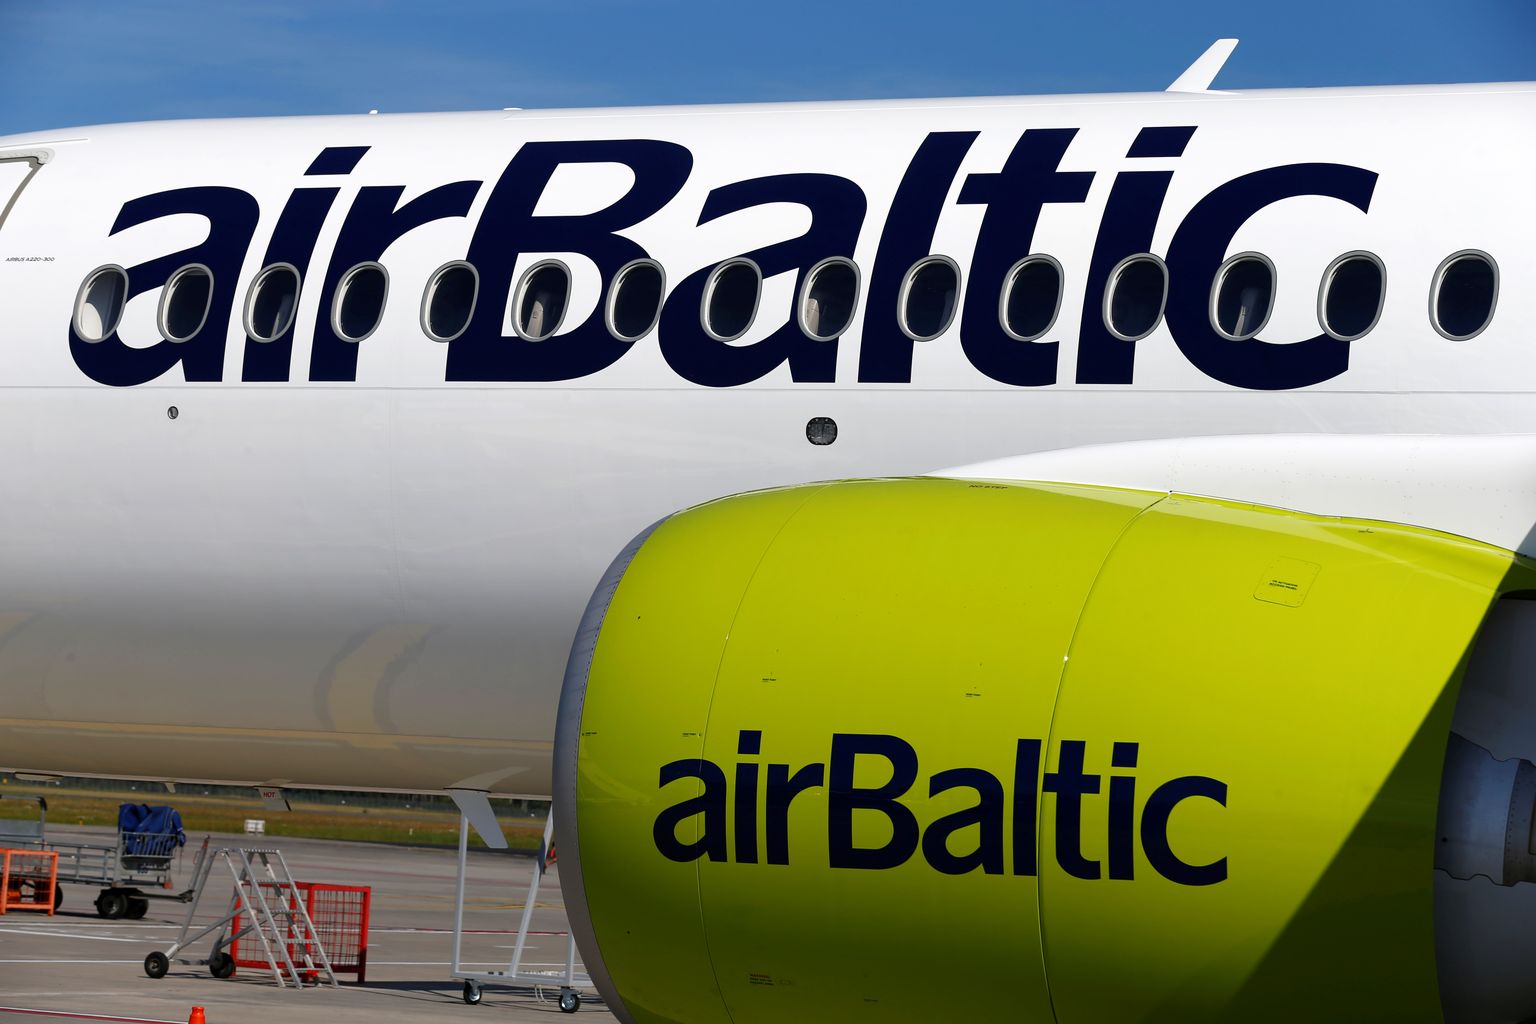 AirBaltic signs are seen on an Airbus A220-300 aircraft at the Riga International Airport, Latvia August 8, 2018. REUTERS/Ints Kalnins